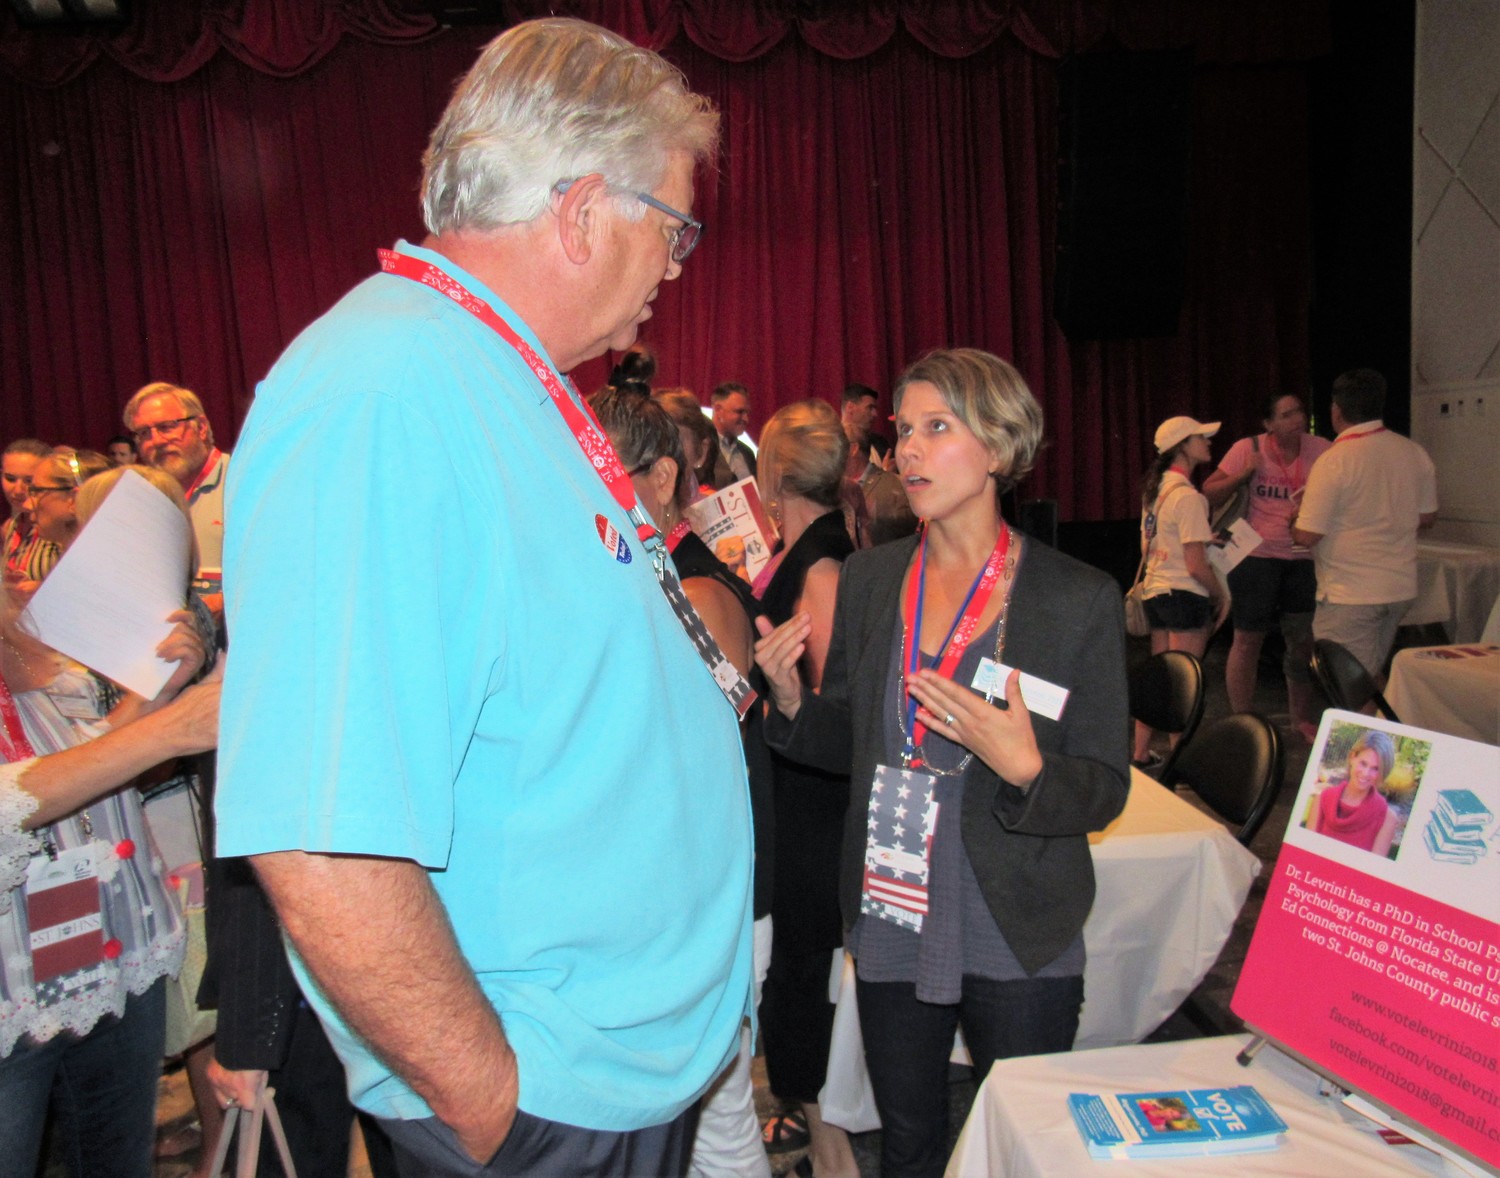 District 4 School Board hopeful Dr. Abigail Levrini shares her platform with a voter at the Politics in St. Johns event July 16 at the Ponte Vedra Concert Hall.